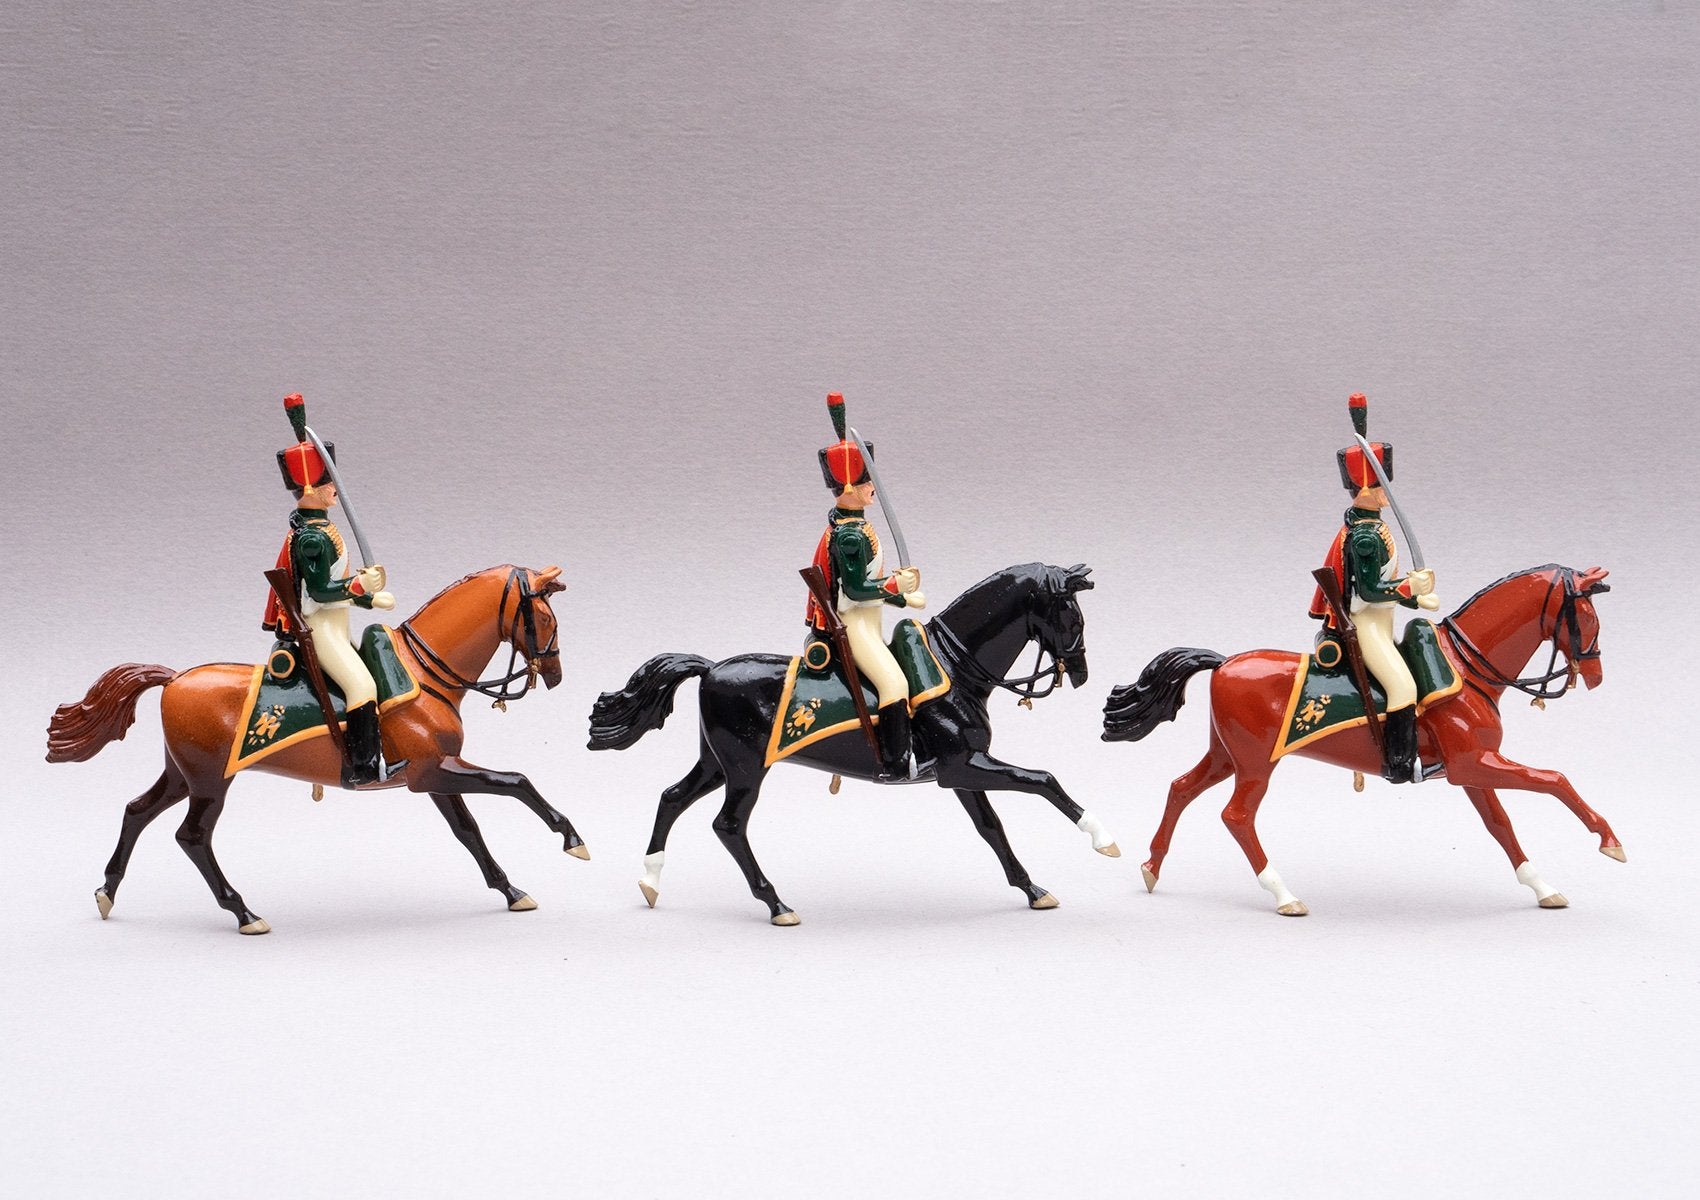 Set 95 Chasseurs à Cheval | French Cavalry | Napoleonic Wars | Three mounted figures with carbines and sabres | Waterloo | © Imperial Productions | Sculpt by David Cowe